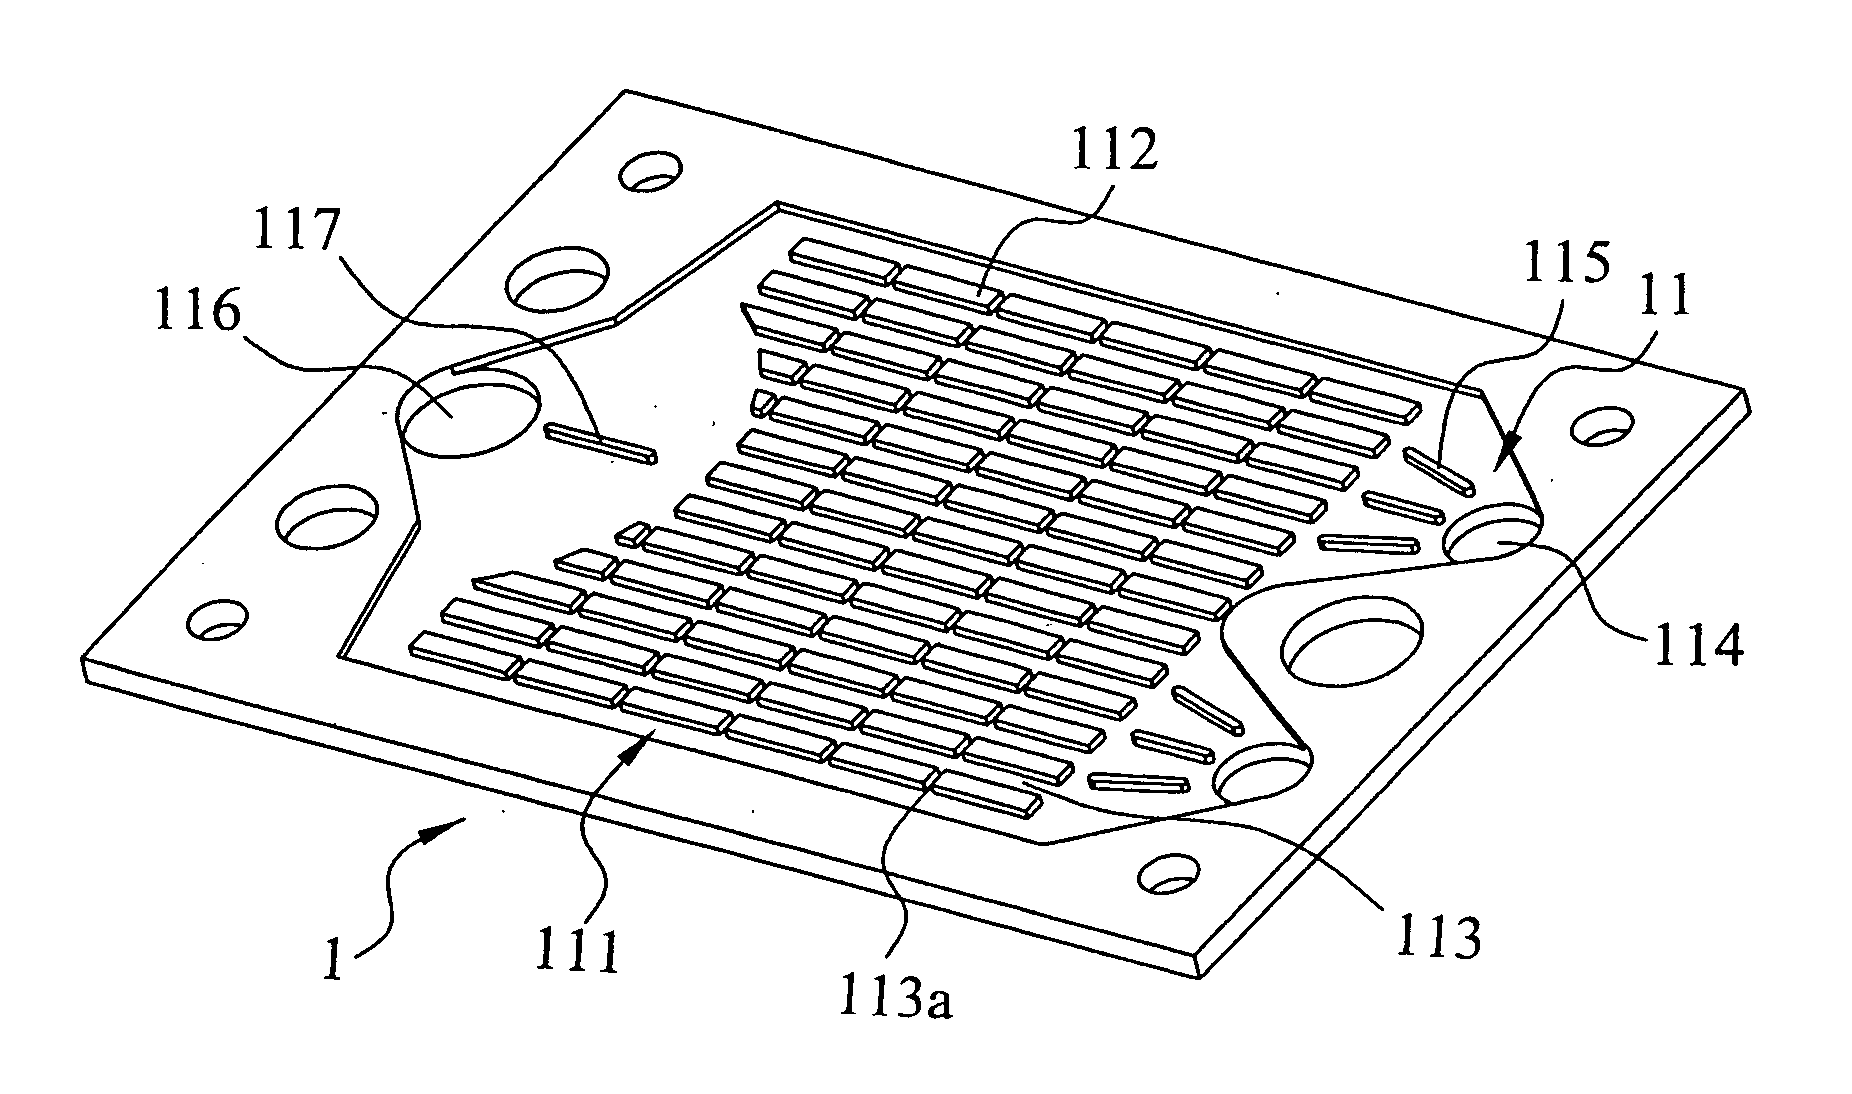 Flow channel on interconnect of planar solid oxide fuel cell